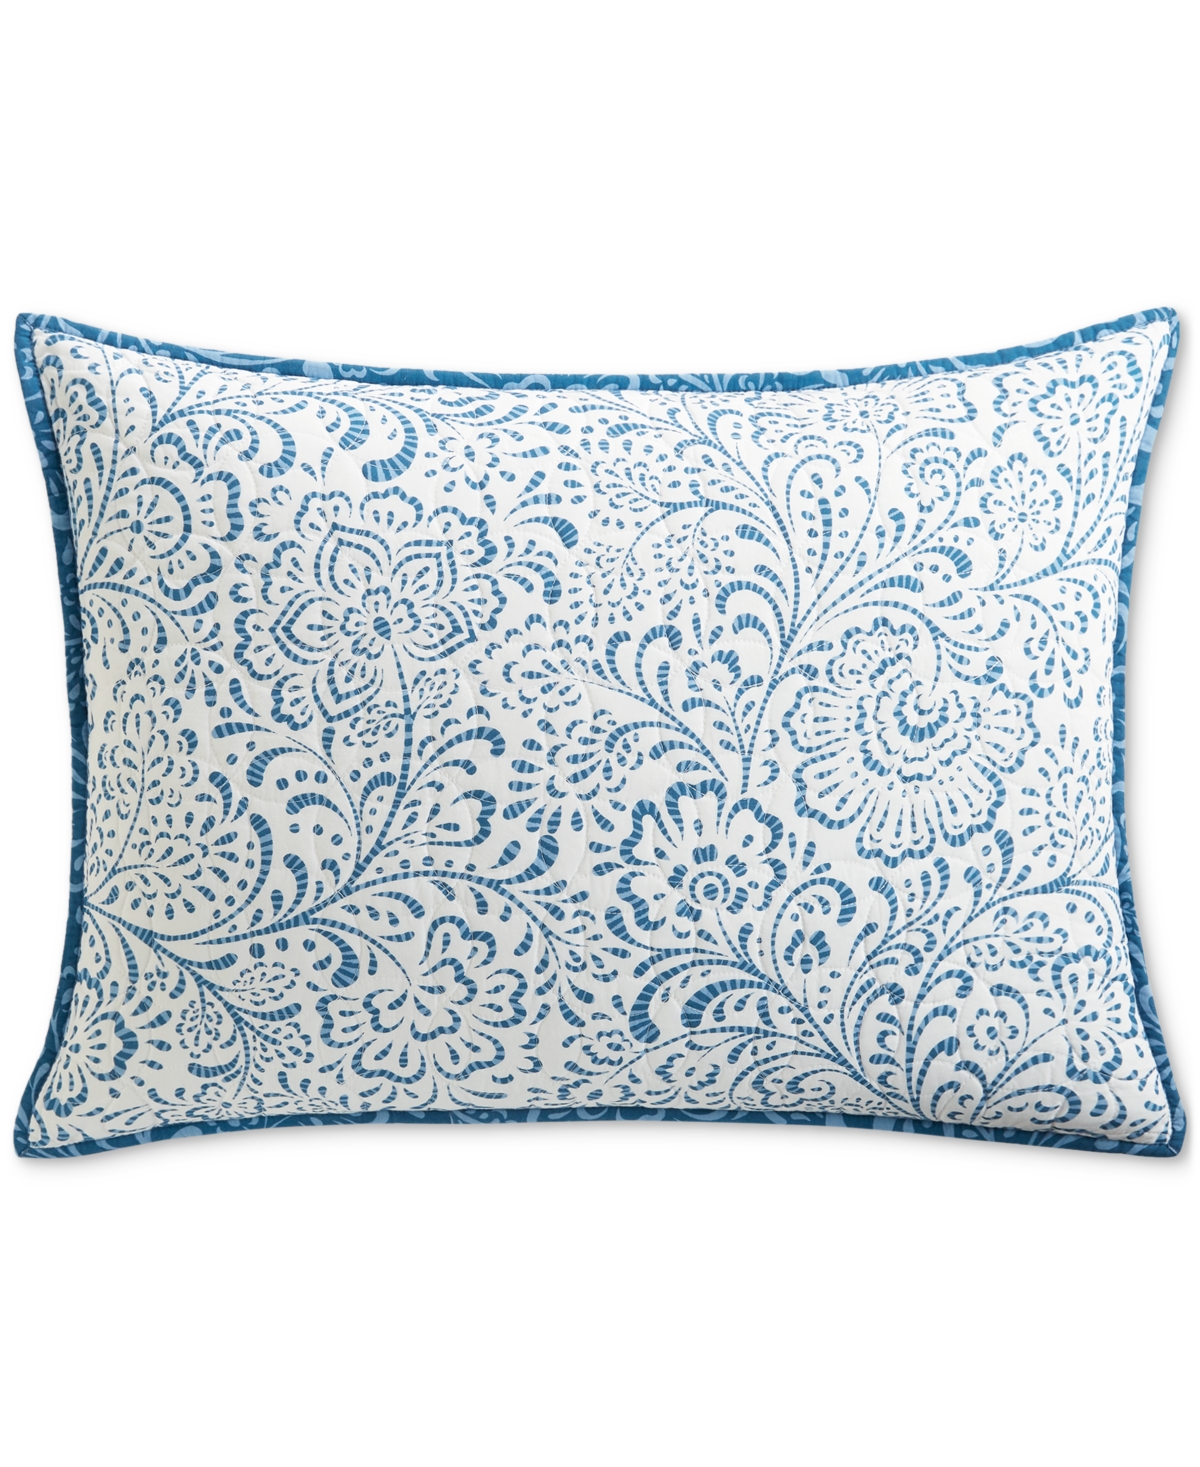 Painted Floral Cotton Sham, Standard, Created for Macy's - Blue Combo